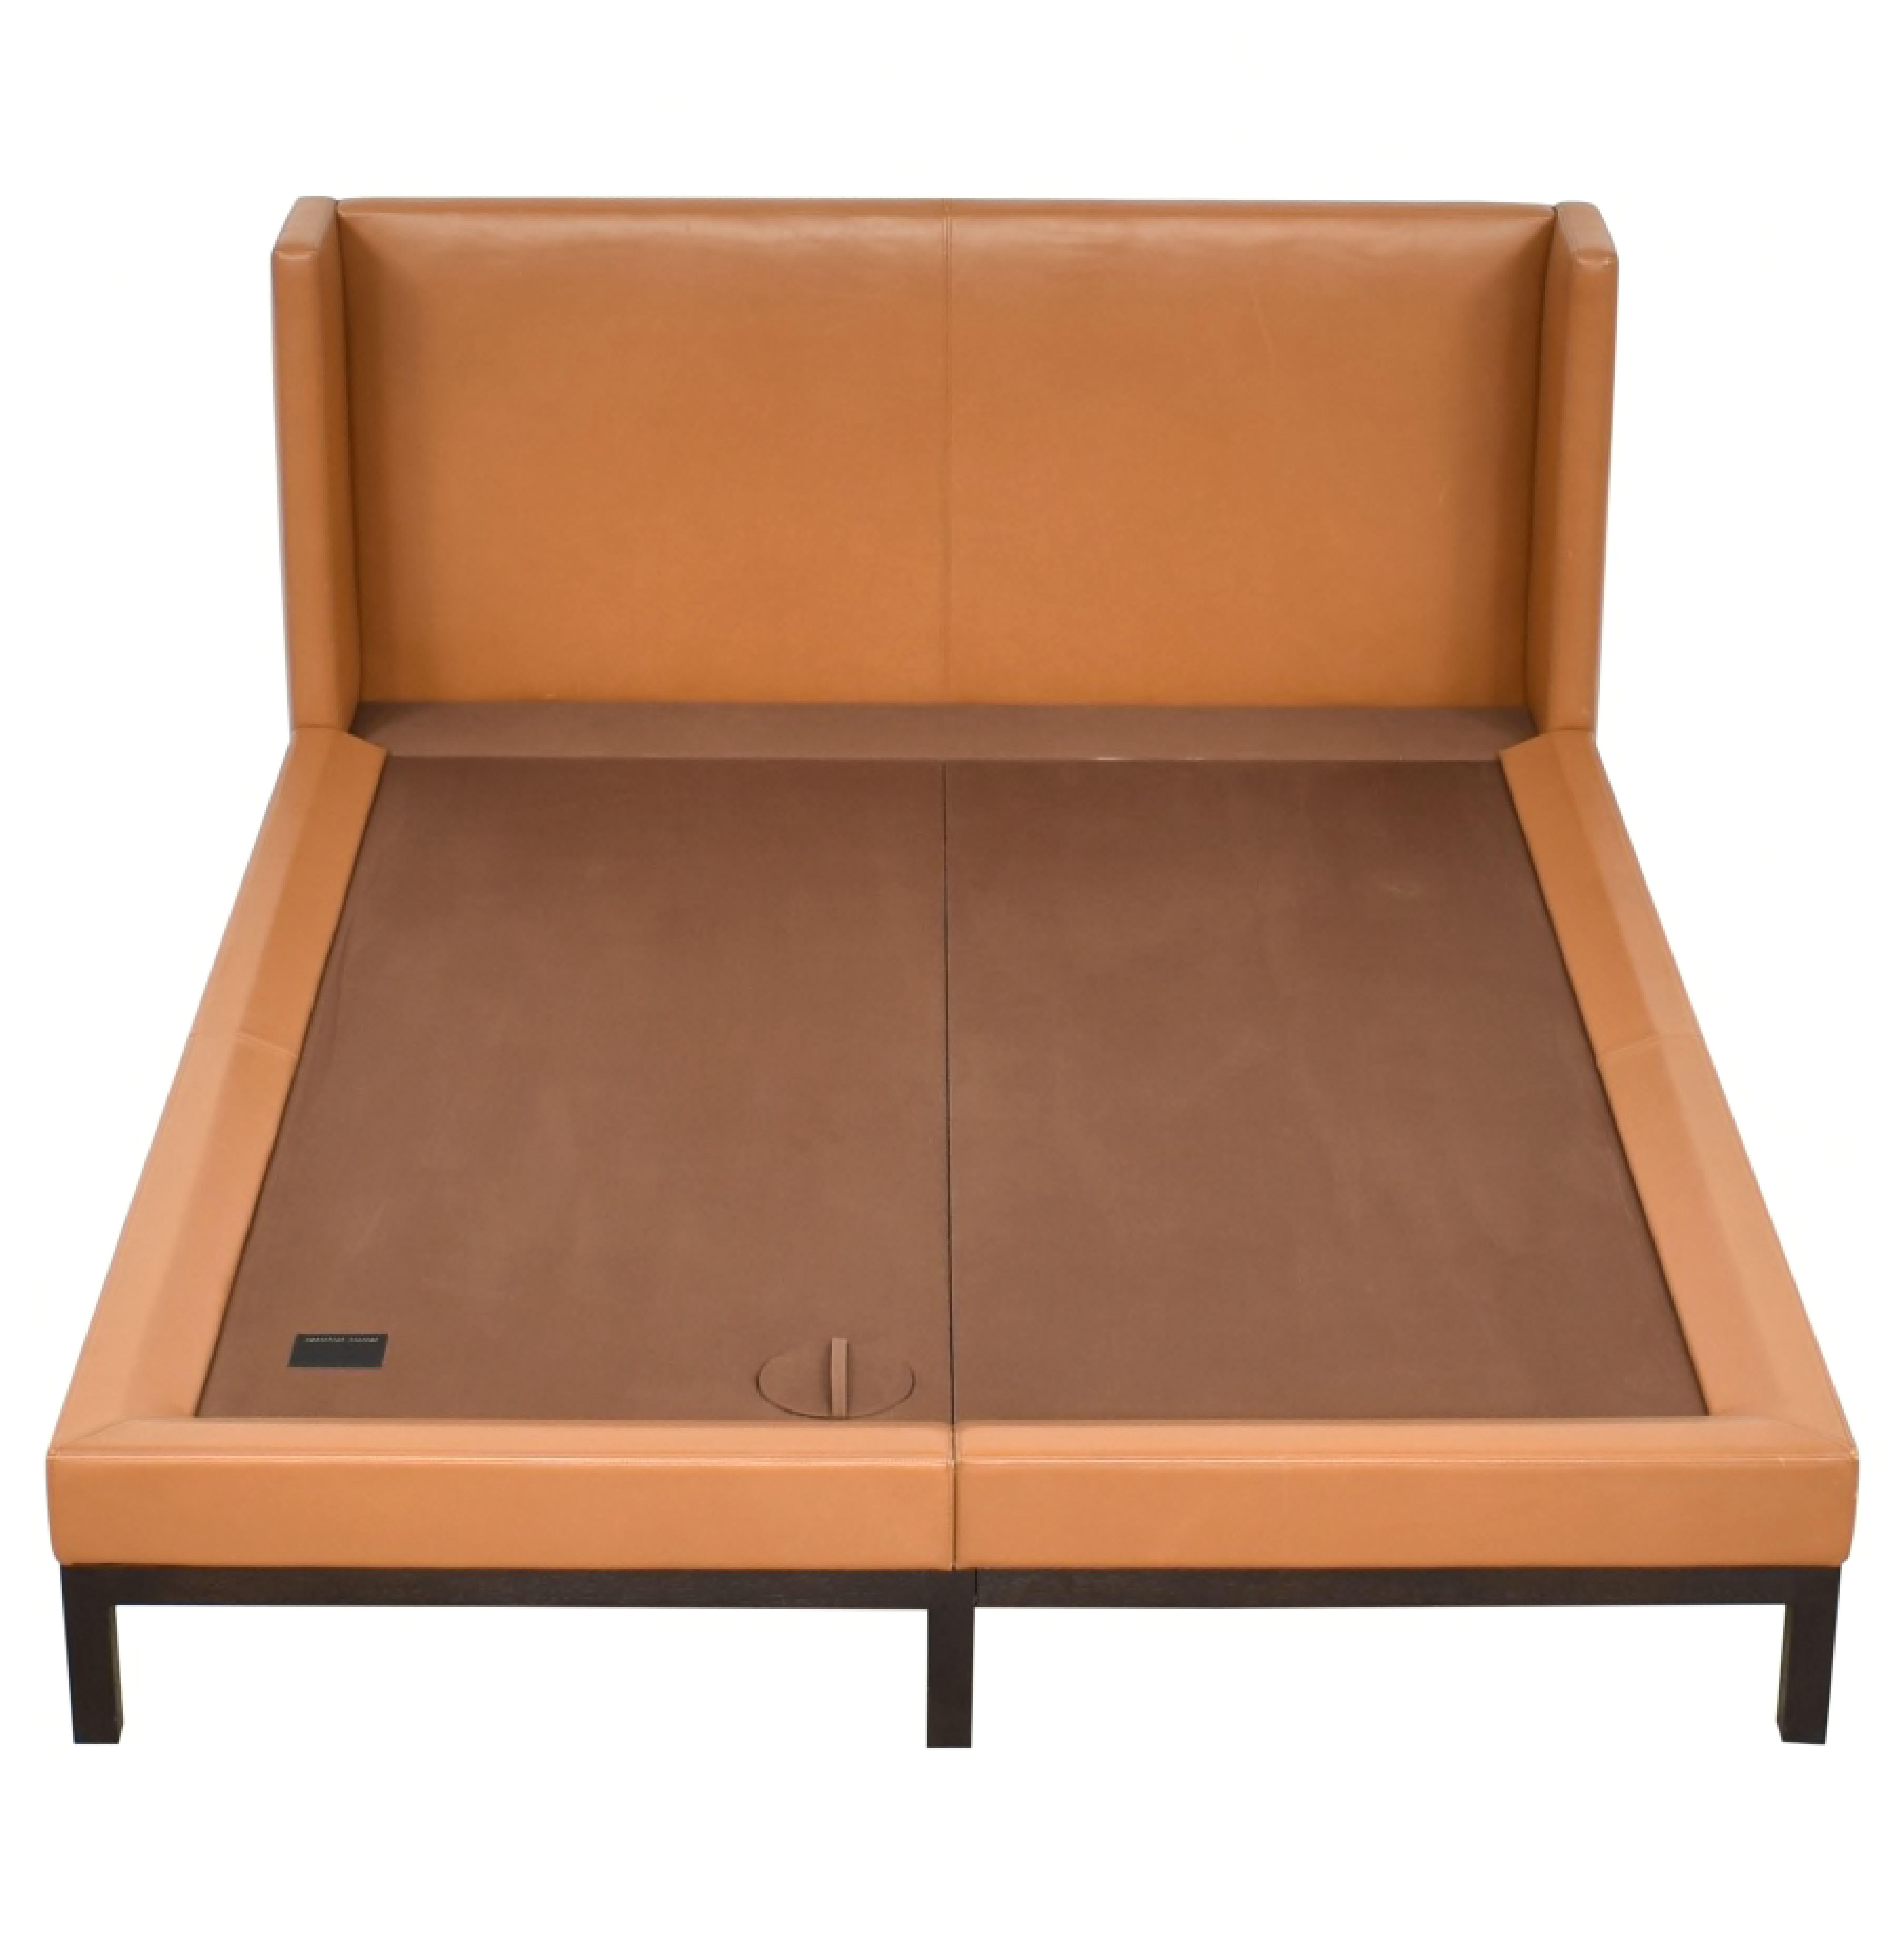 Christian Liaigre Saddle Leather Omen Bed, Queen/Double, France, c. 1994 For Sale 1